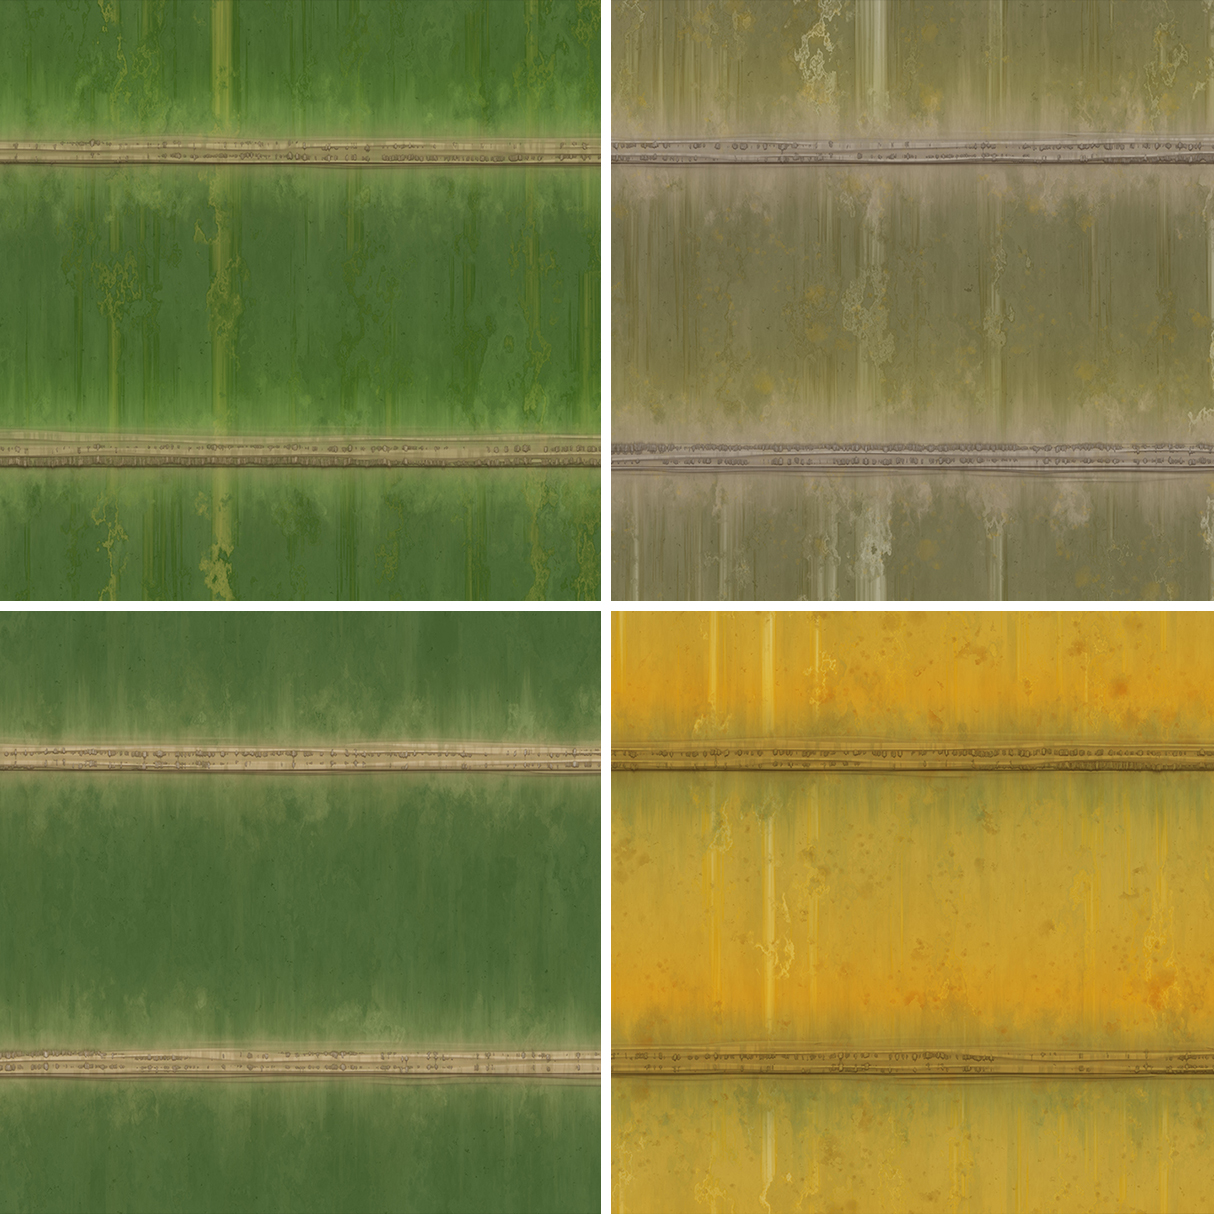 20 Bamboo Background Textures Square Samples Preview 1